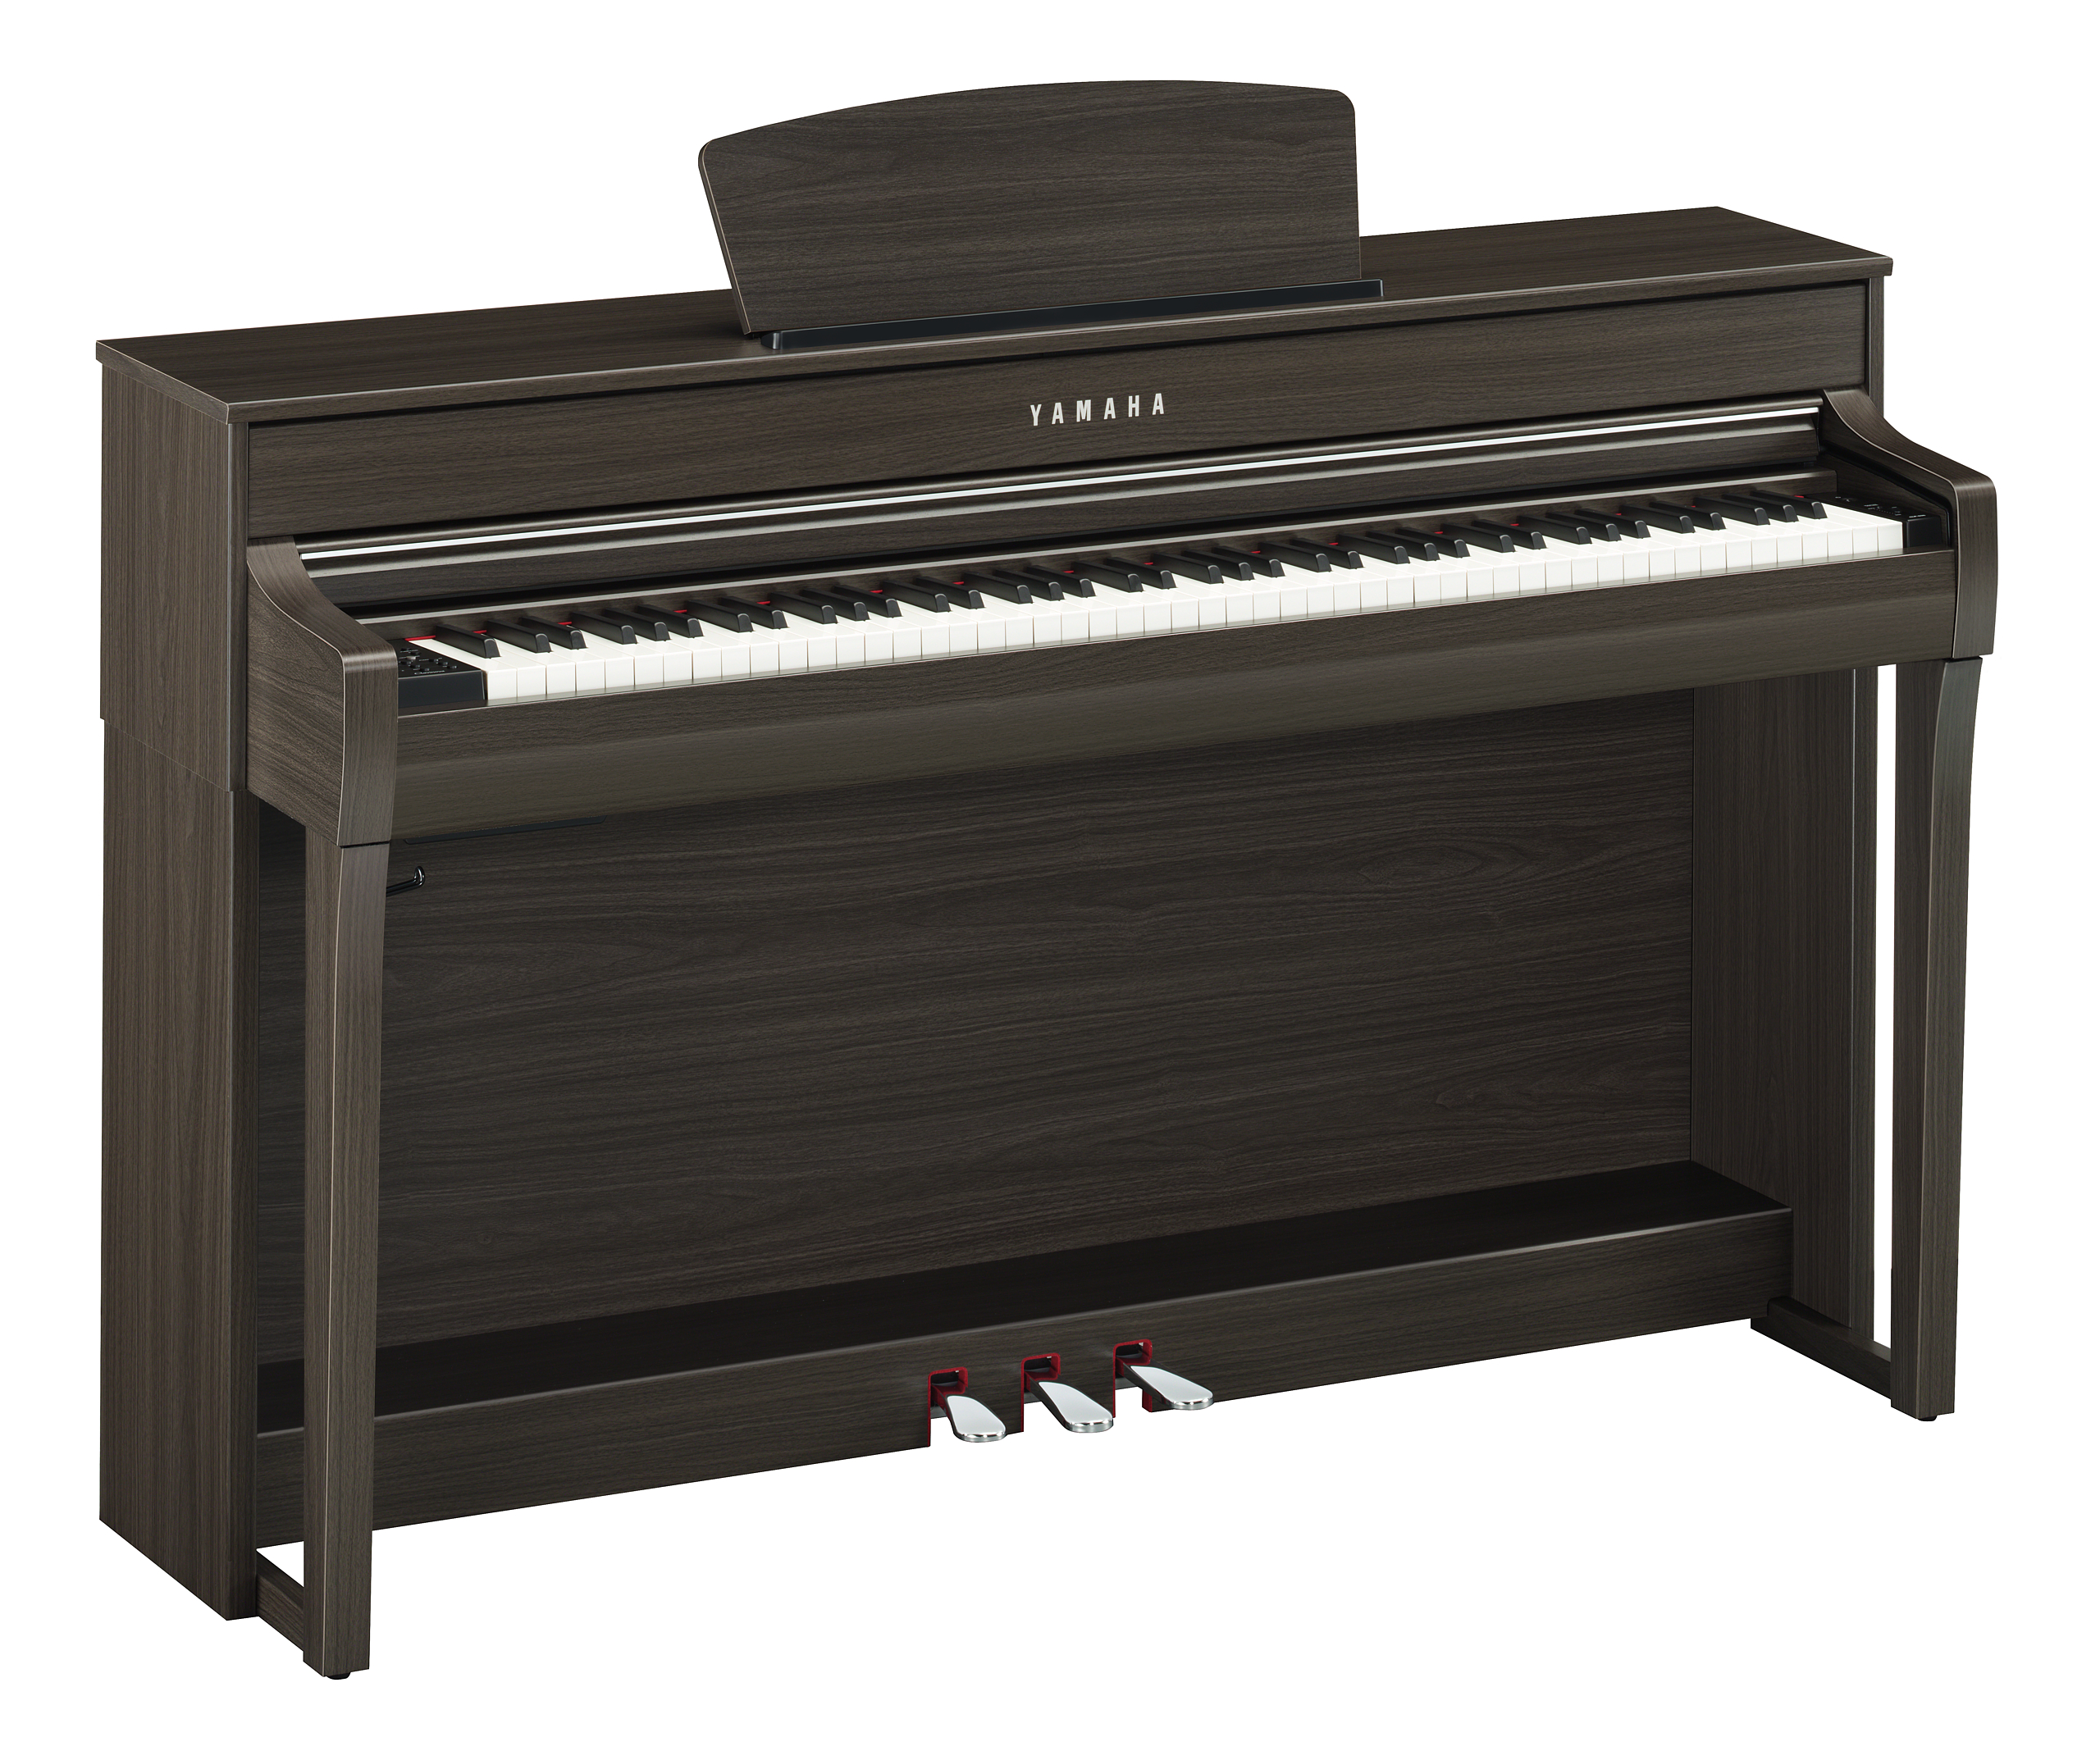 Yamaha Clp735dw - Digital piano with stand - Variation 1